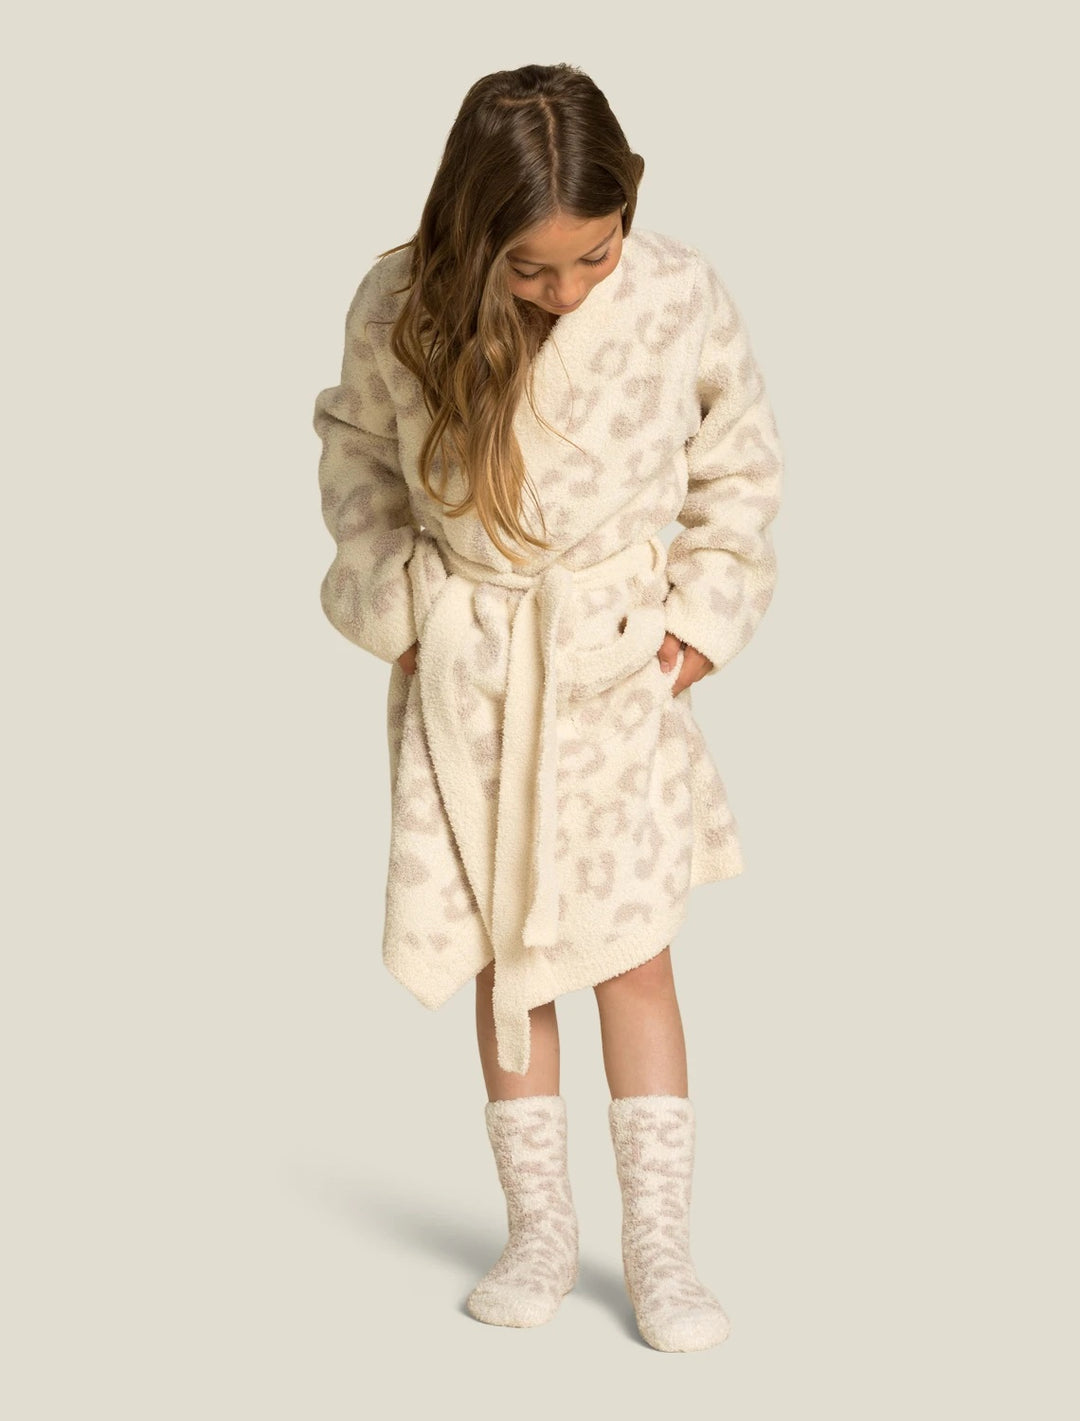 Barefoot Dreams - CozyChic Youth Barefoot in the Wild Socks in Cream-Stone